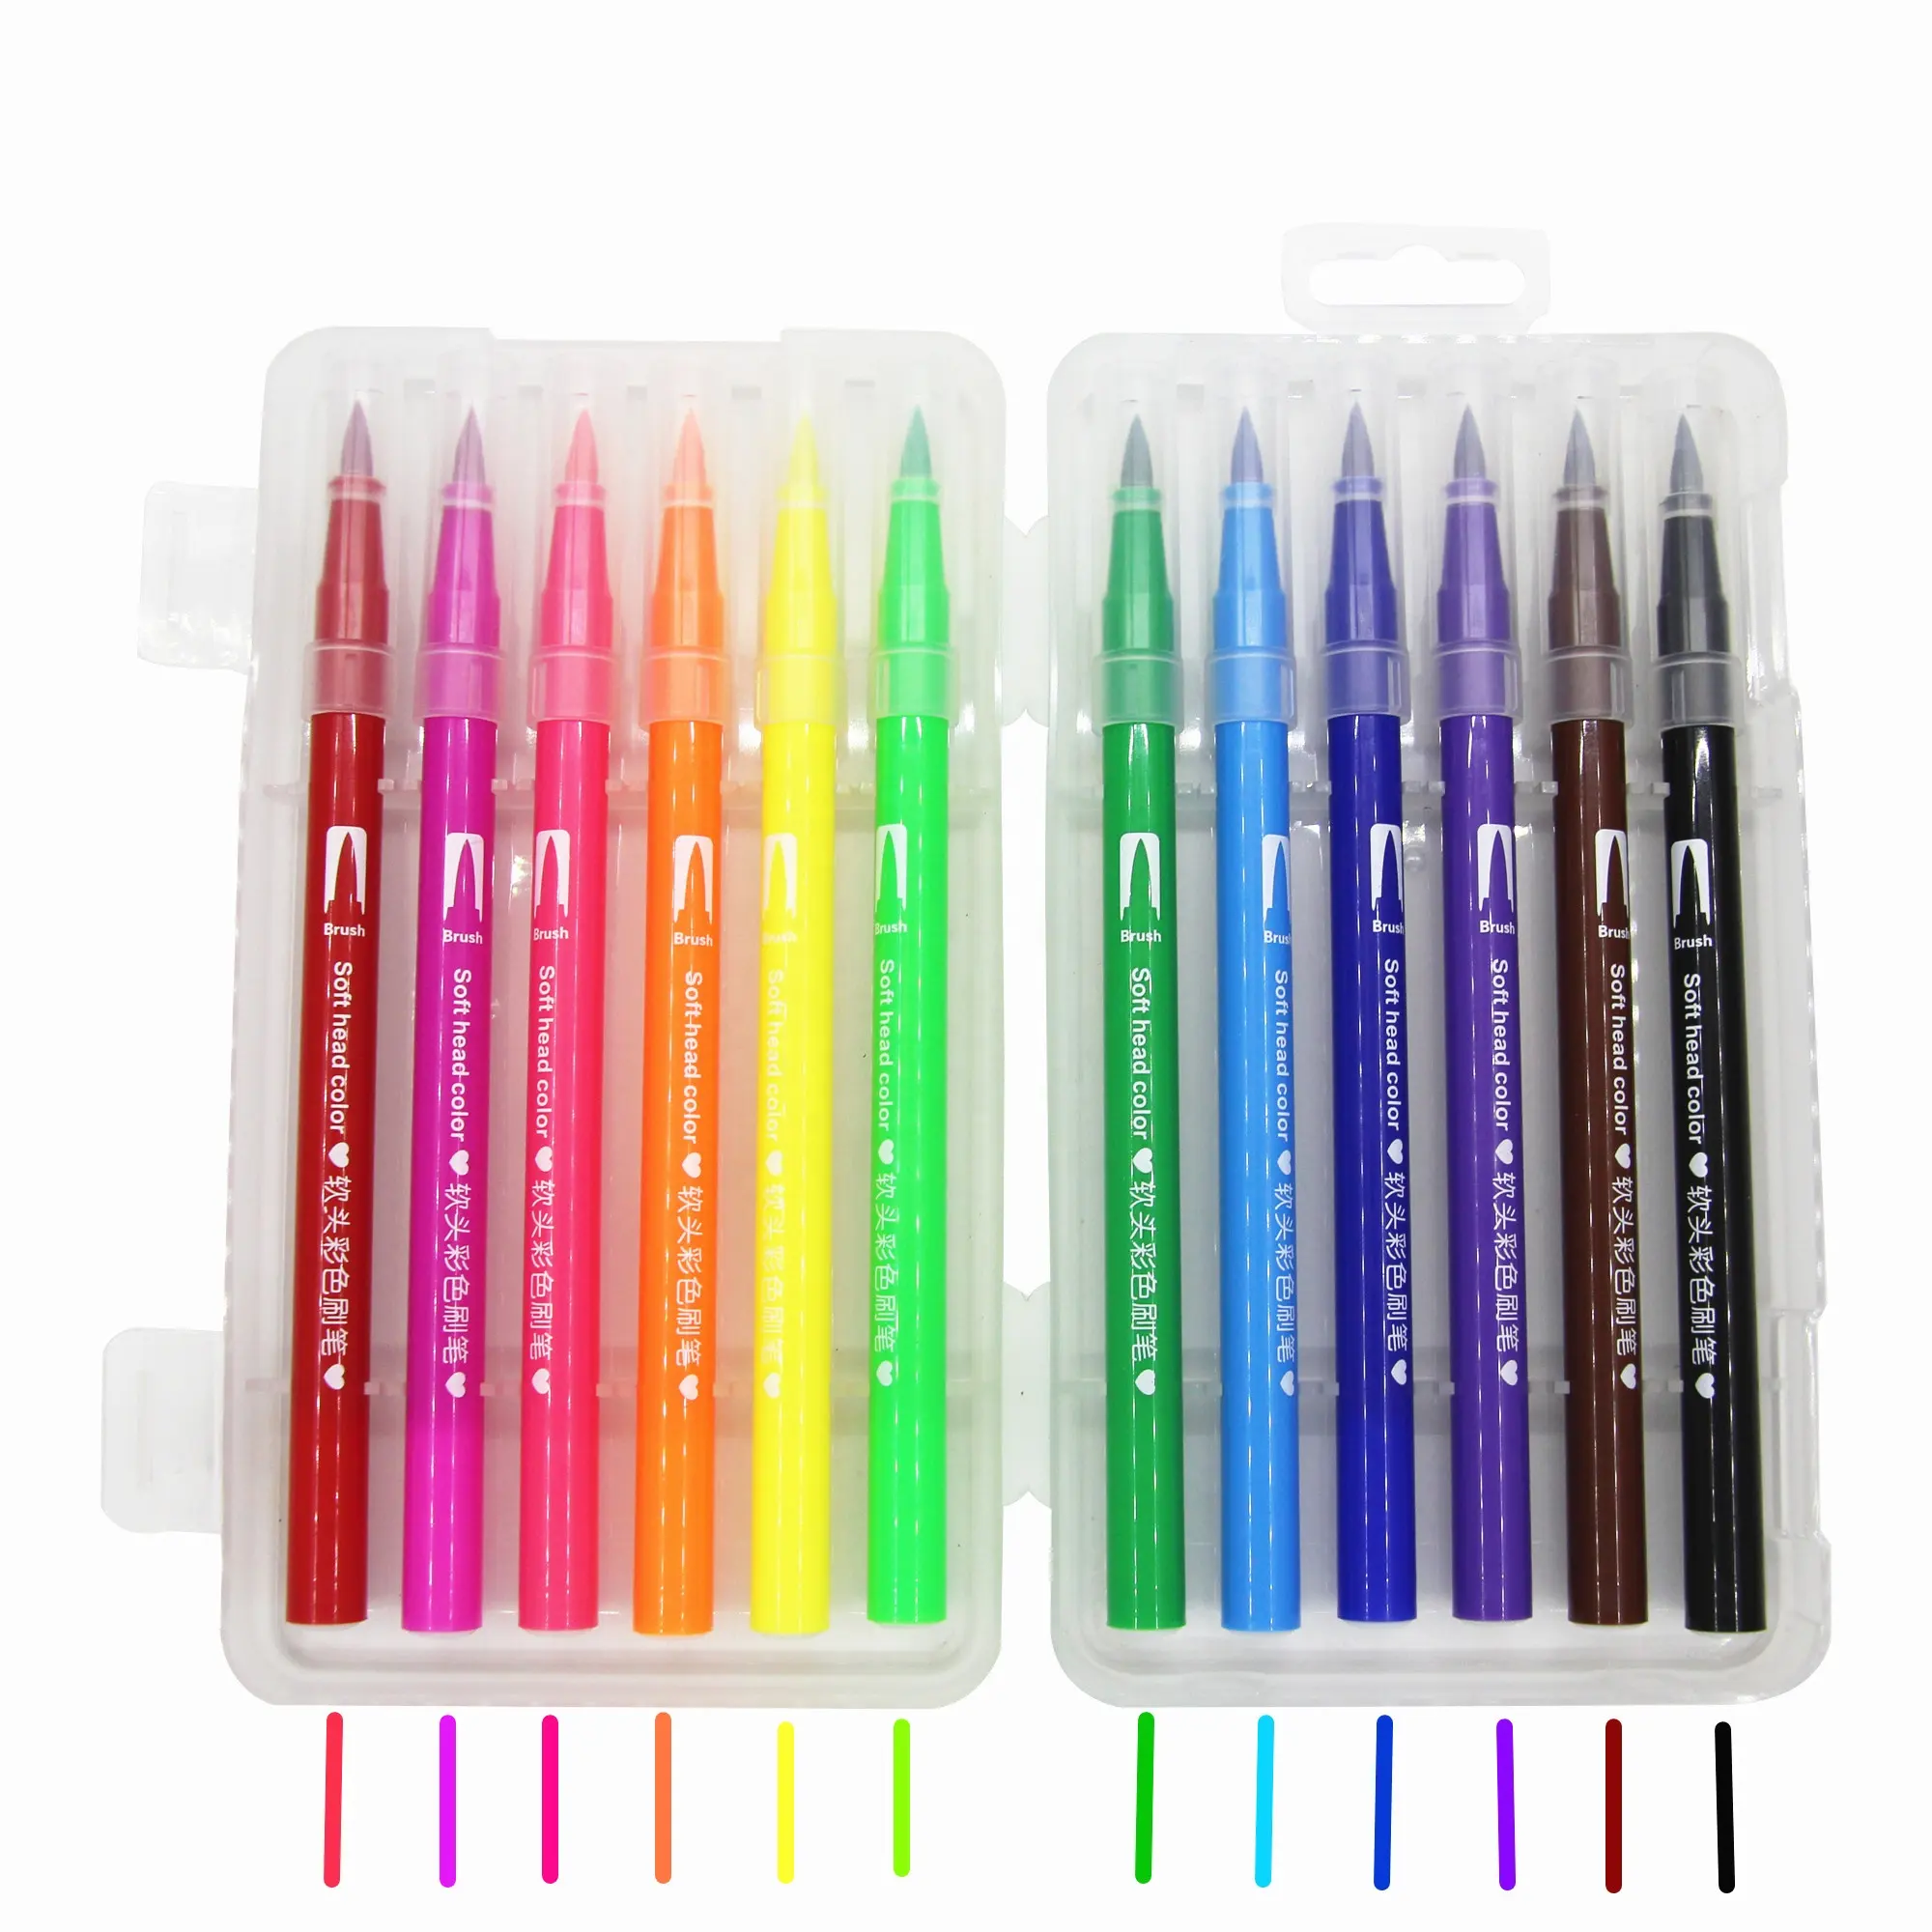 12 Unique Colors Watercolor Brush Pen Markers for Drawing and Coloring